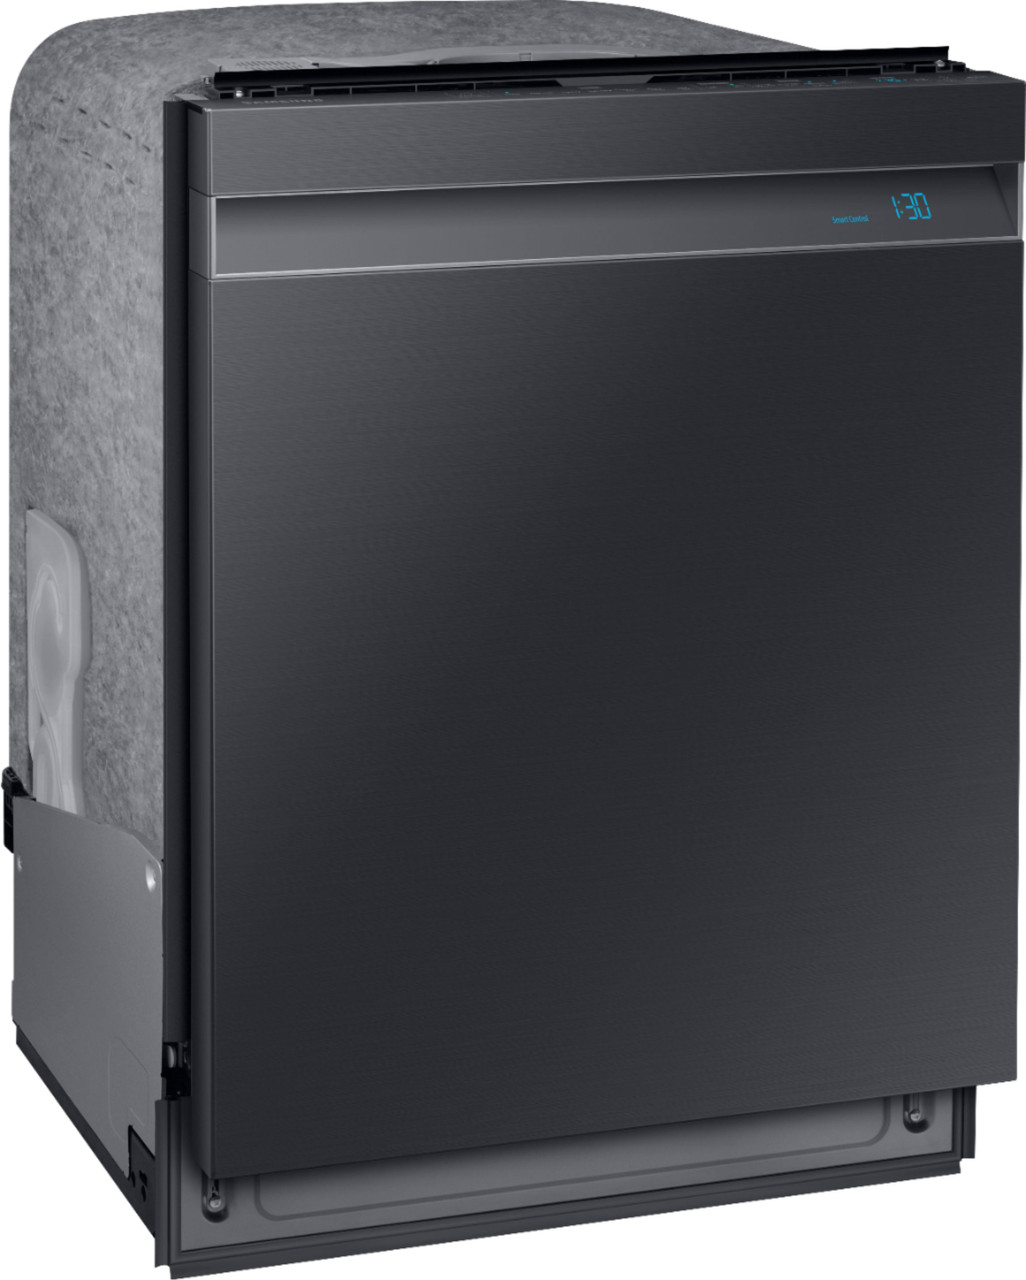 Samsung - Linear Wash 24" Top Control Built-In Dishwasher with Stainless Steel Tub - Fingerprint Resistant Black Stainless Steel